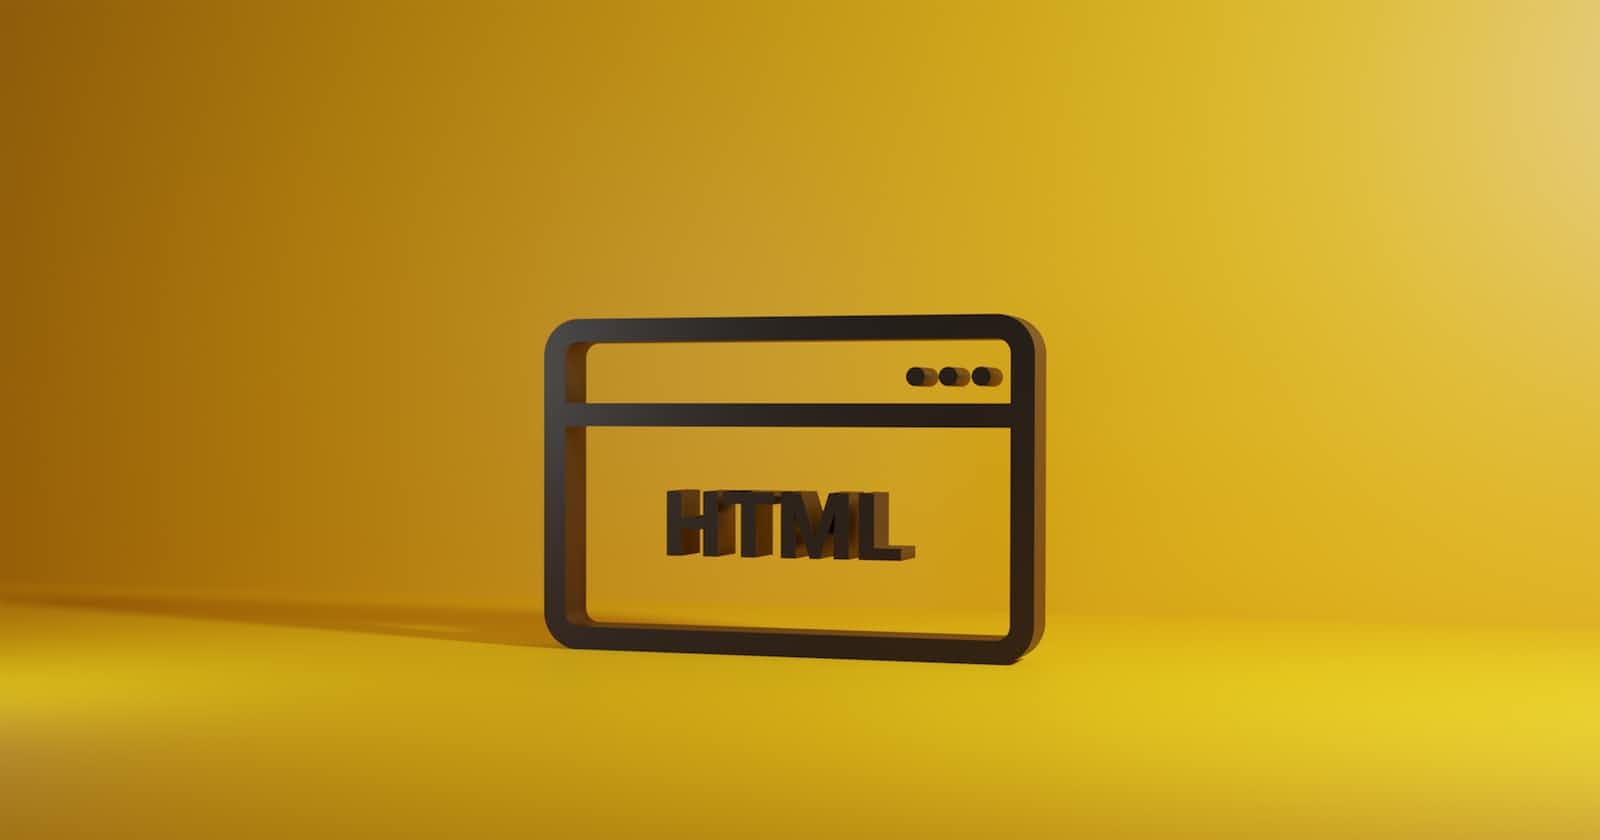 A quick guide to HTML and Emmet